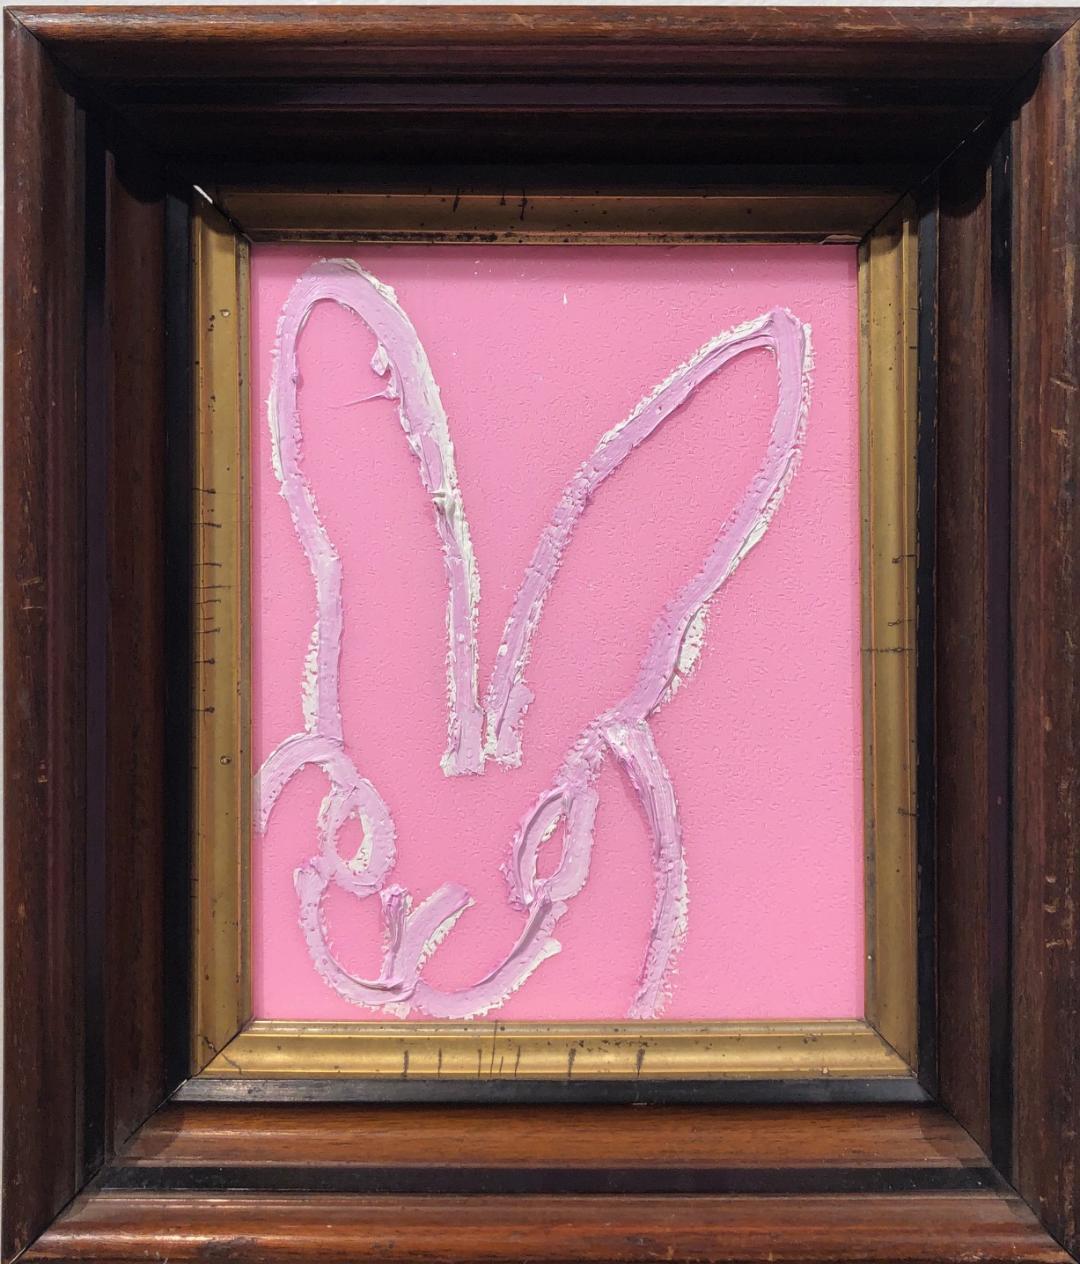 Renowned artist Hunt Slonem's "White and Purple Bunny on Pink" 10x8 white and purple oil and pink diamond dust painting on wood board of a contemporary abstract rabbit in his choice of antique framing.

*Painting is framed - Please note that not all